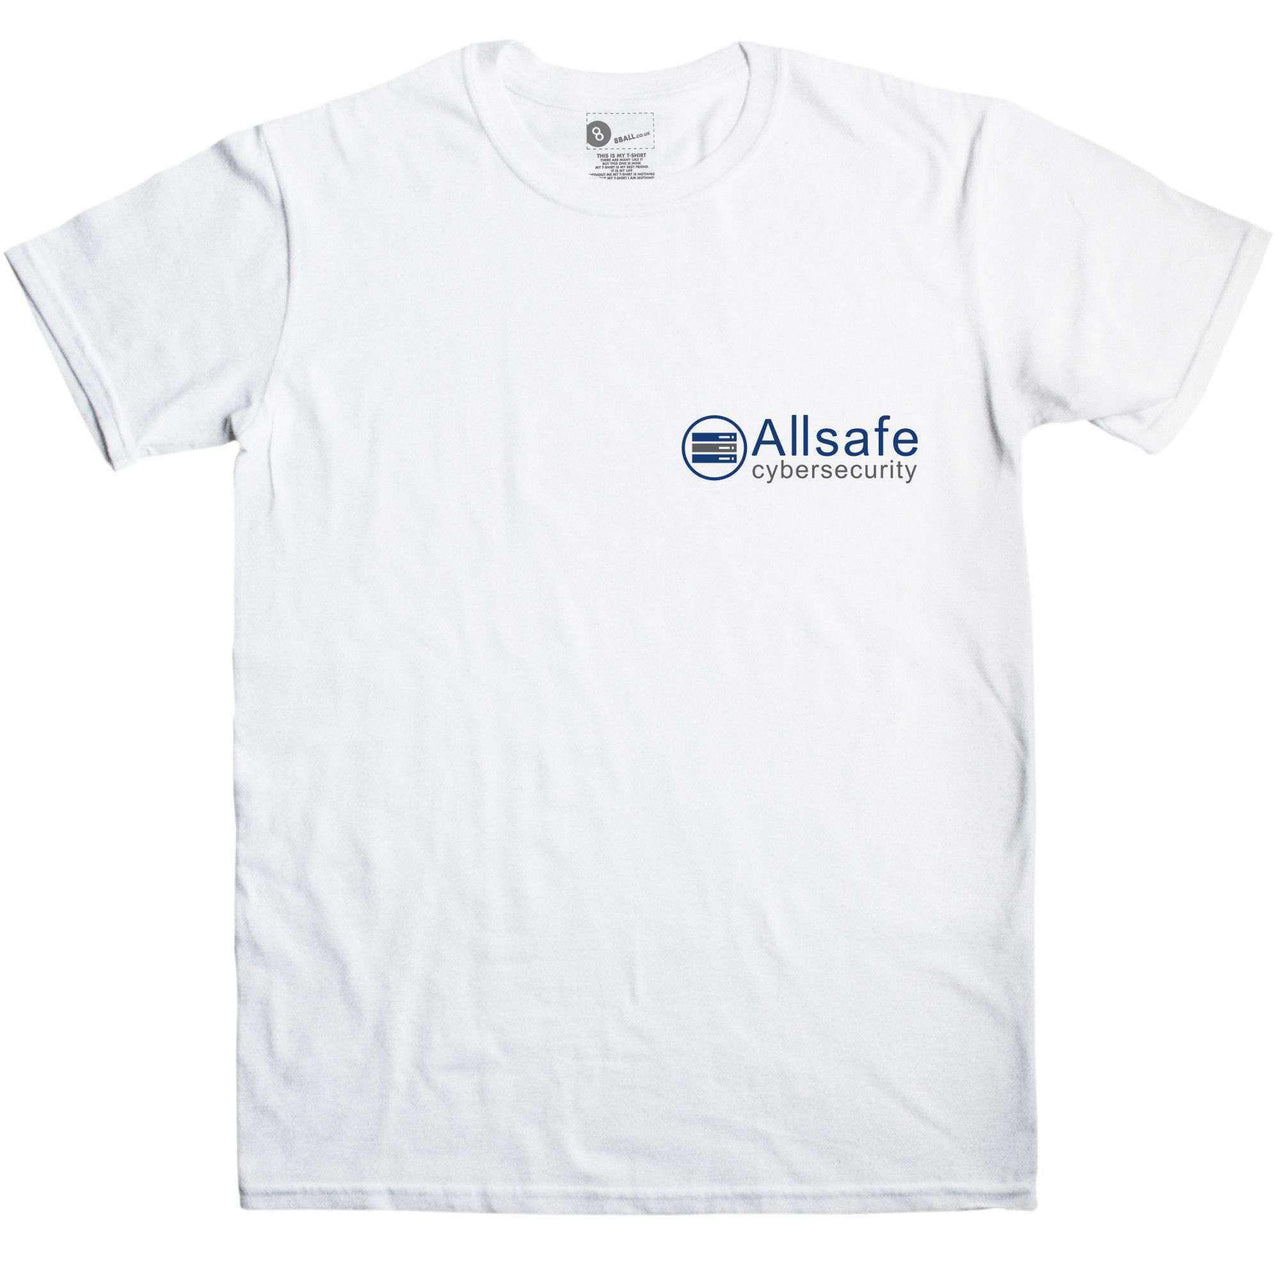 Allsafe Cybersecurity Mens Graphic T-Shirt 8Ball